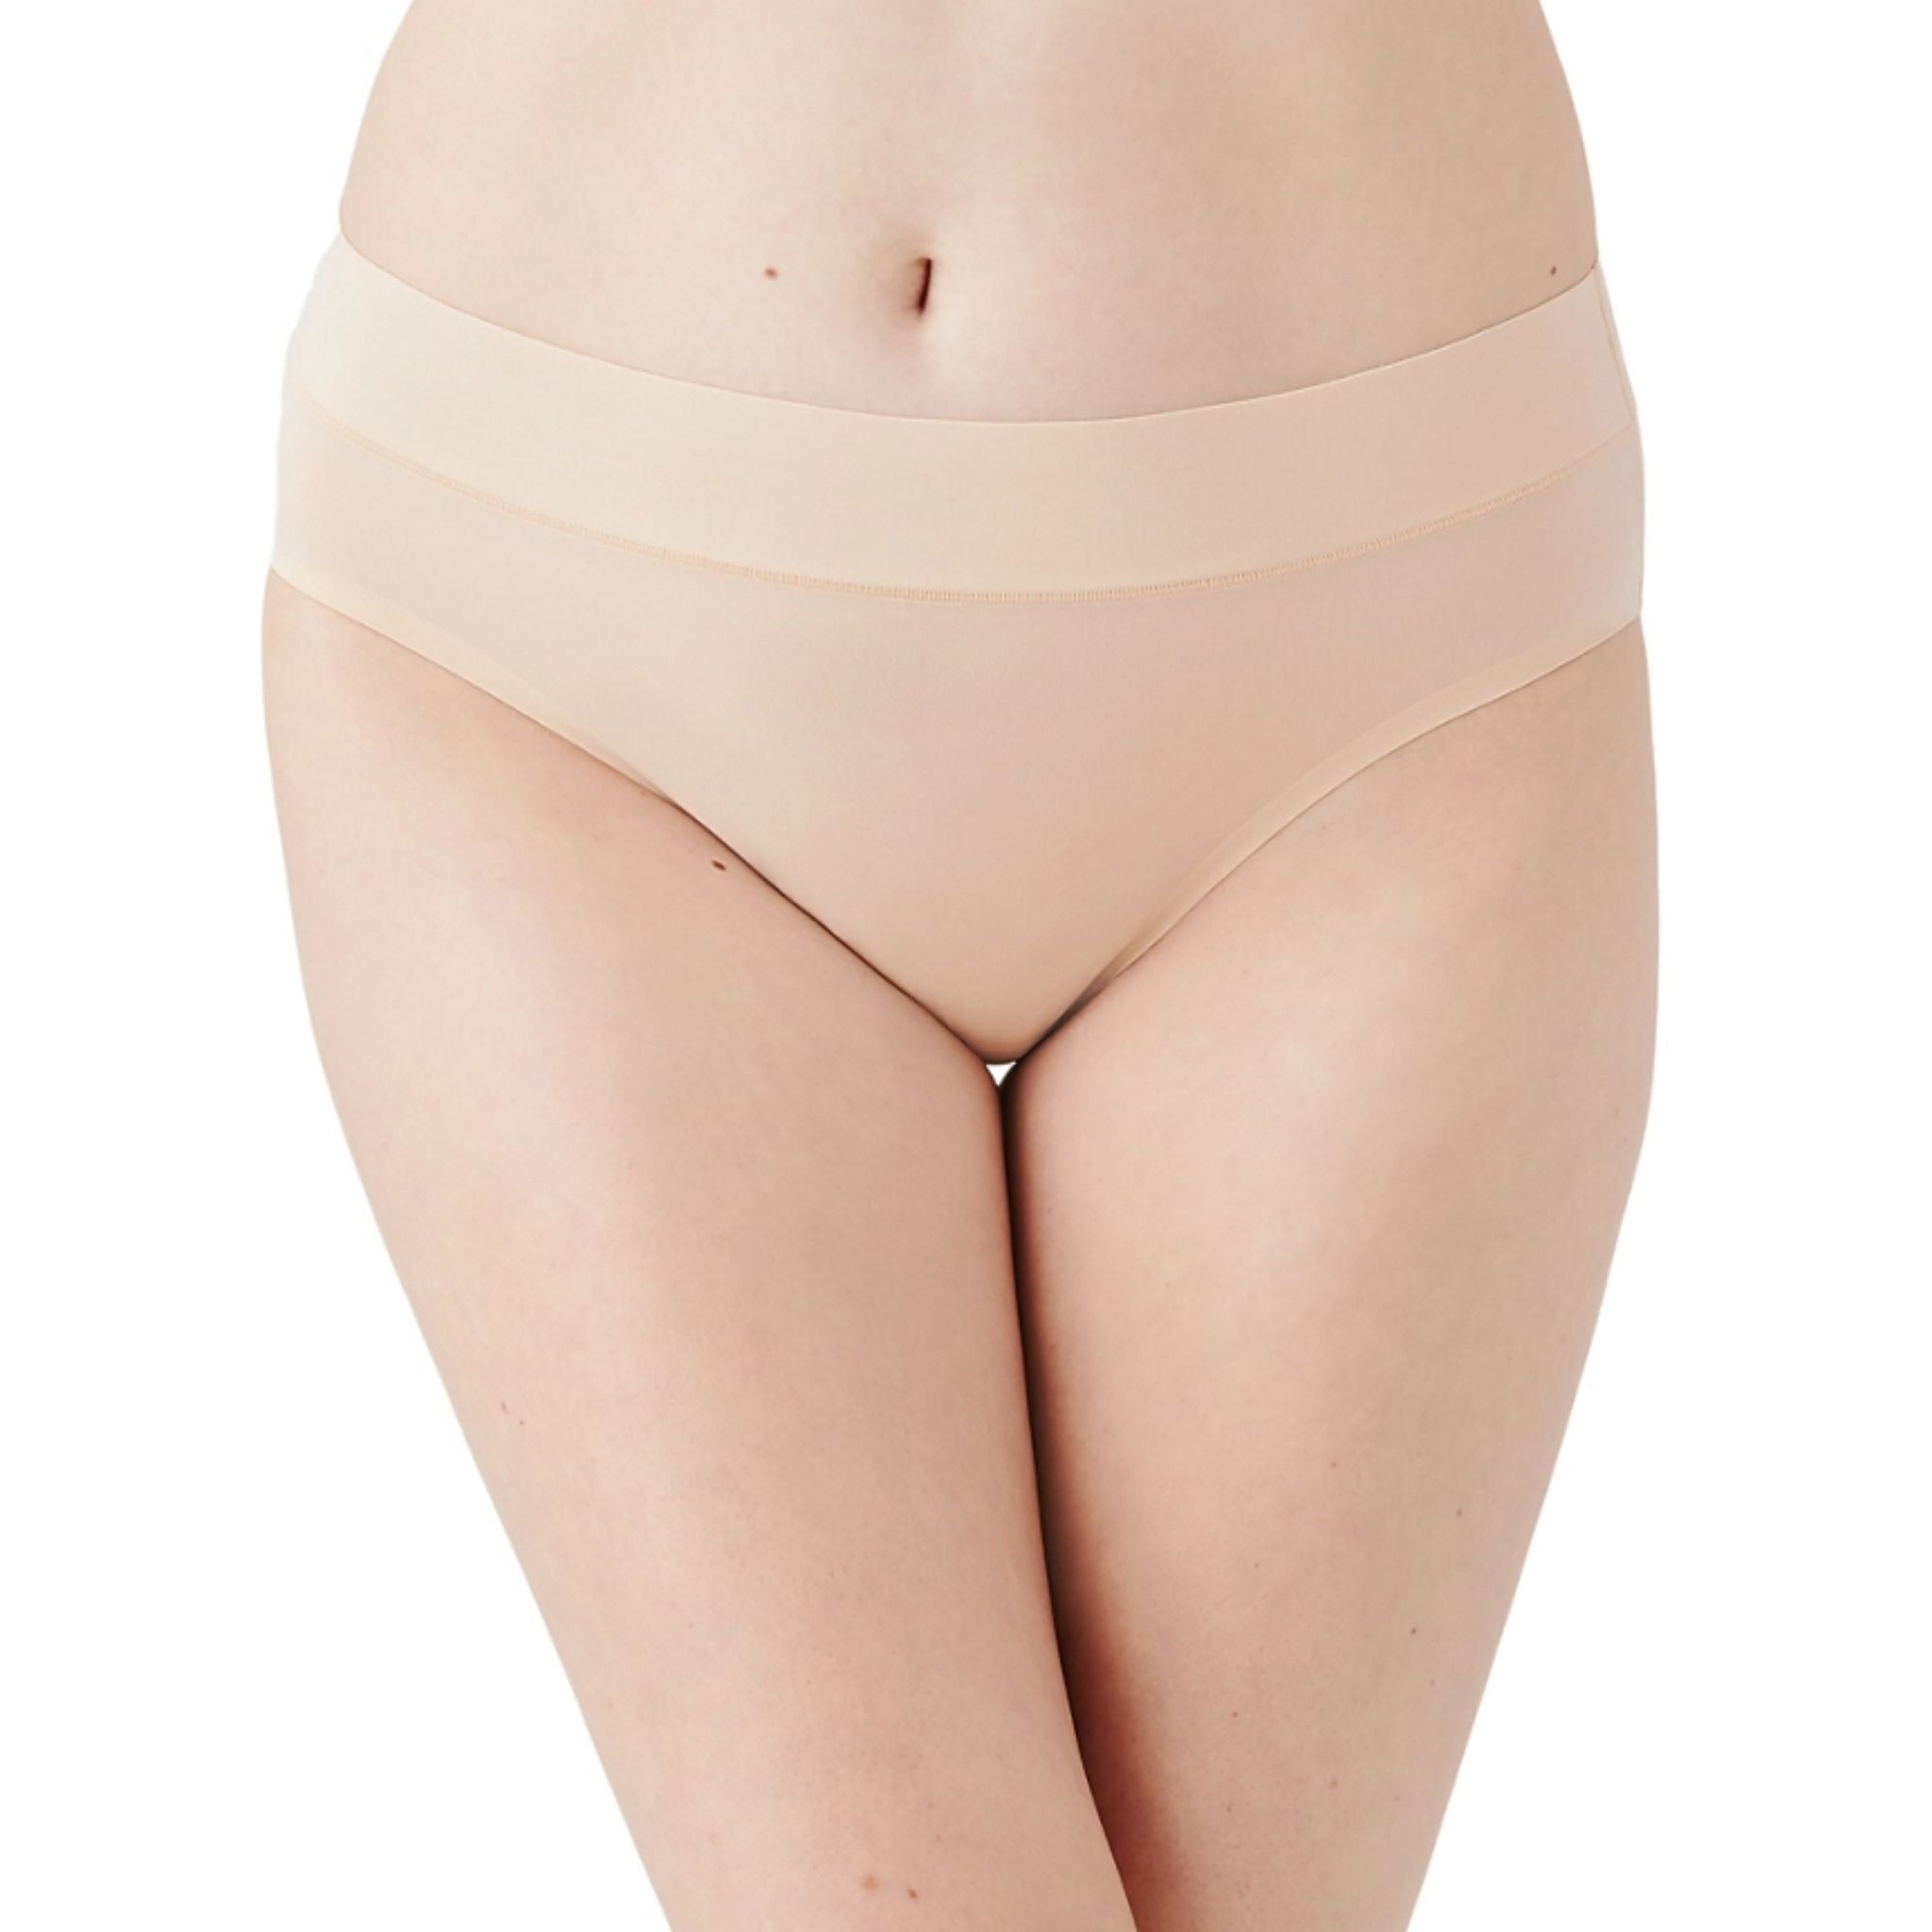 Uncomplicated and oh-so comfy, this easy-to-wear panty has an elastic-free waistband that won't pinch or dig and virtually vanishes under your clothes, making it the perfect start to any outfit.   Hipster Wide, elastic-free waistband won't pinch or dig and provides a smooth look under clothes Bonded leg openings eliminate panty lines Cotton gusset  Fabric content: Body: 79% Nylon/21% Spandex, Crotch Lining: 100% Cotton